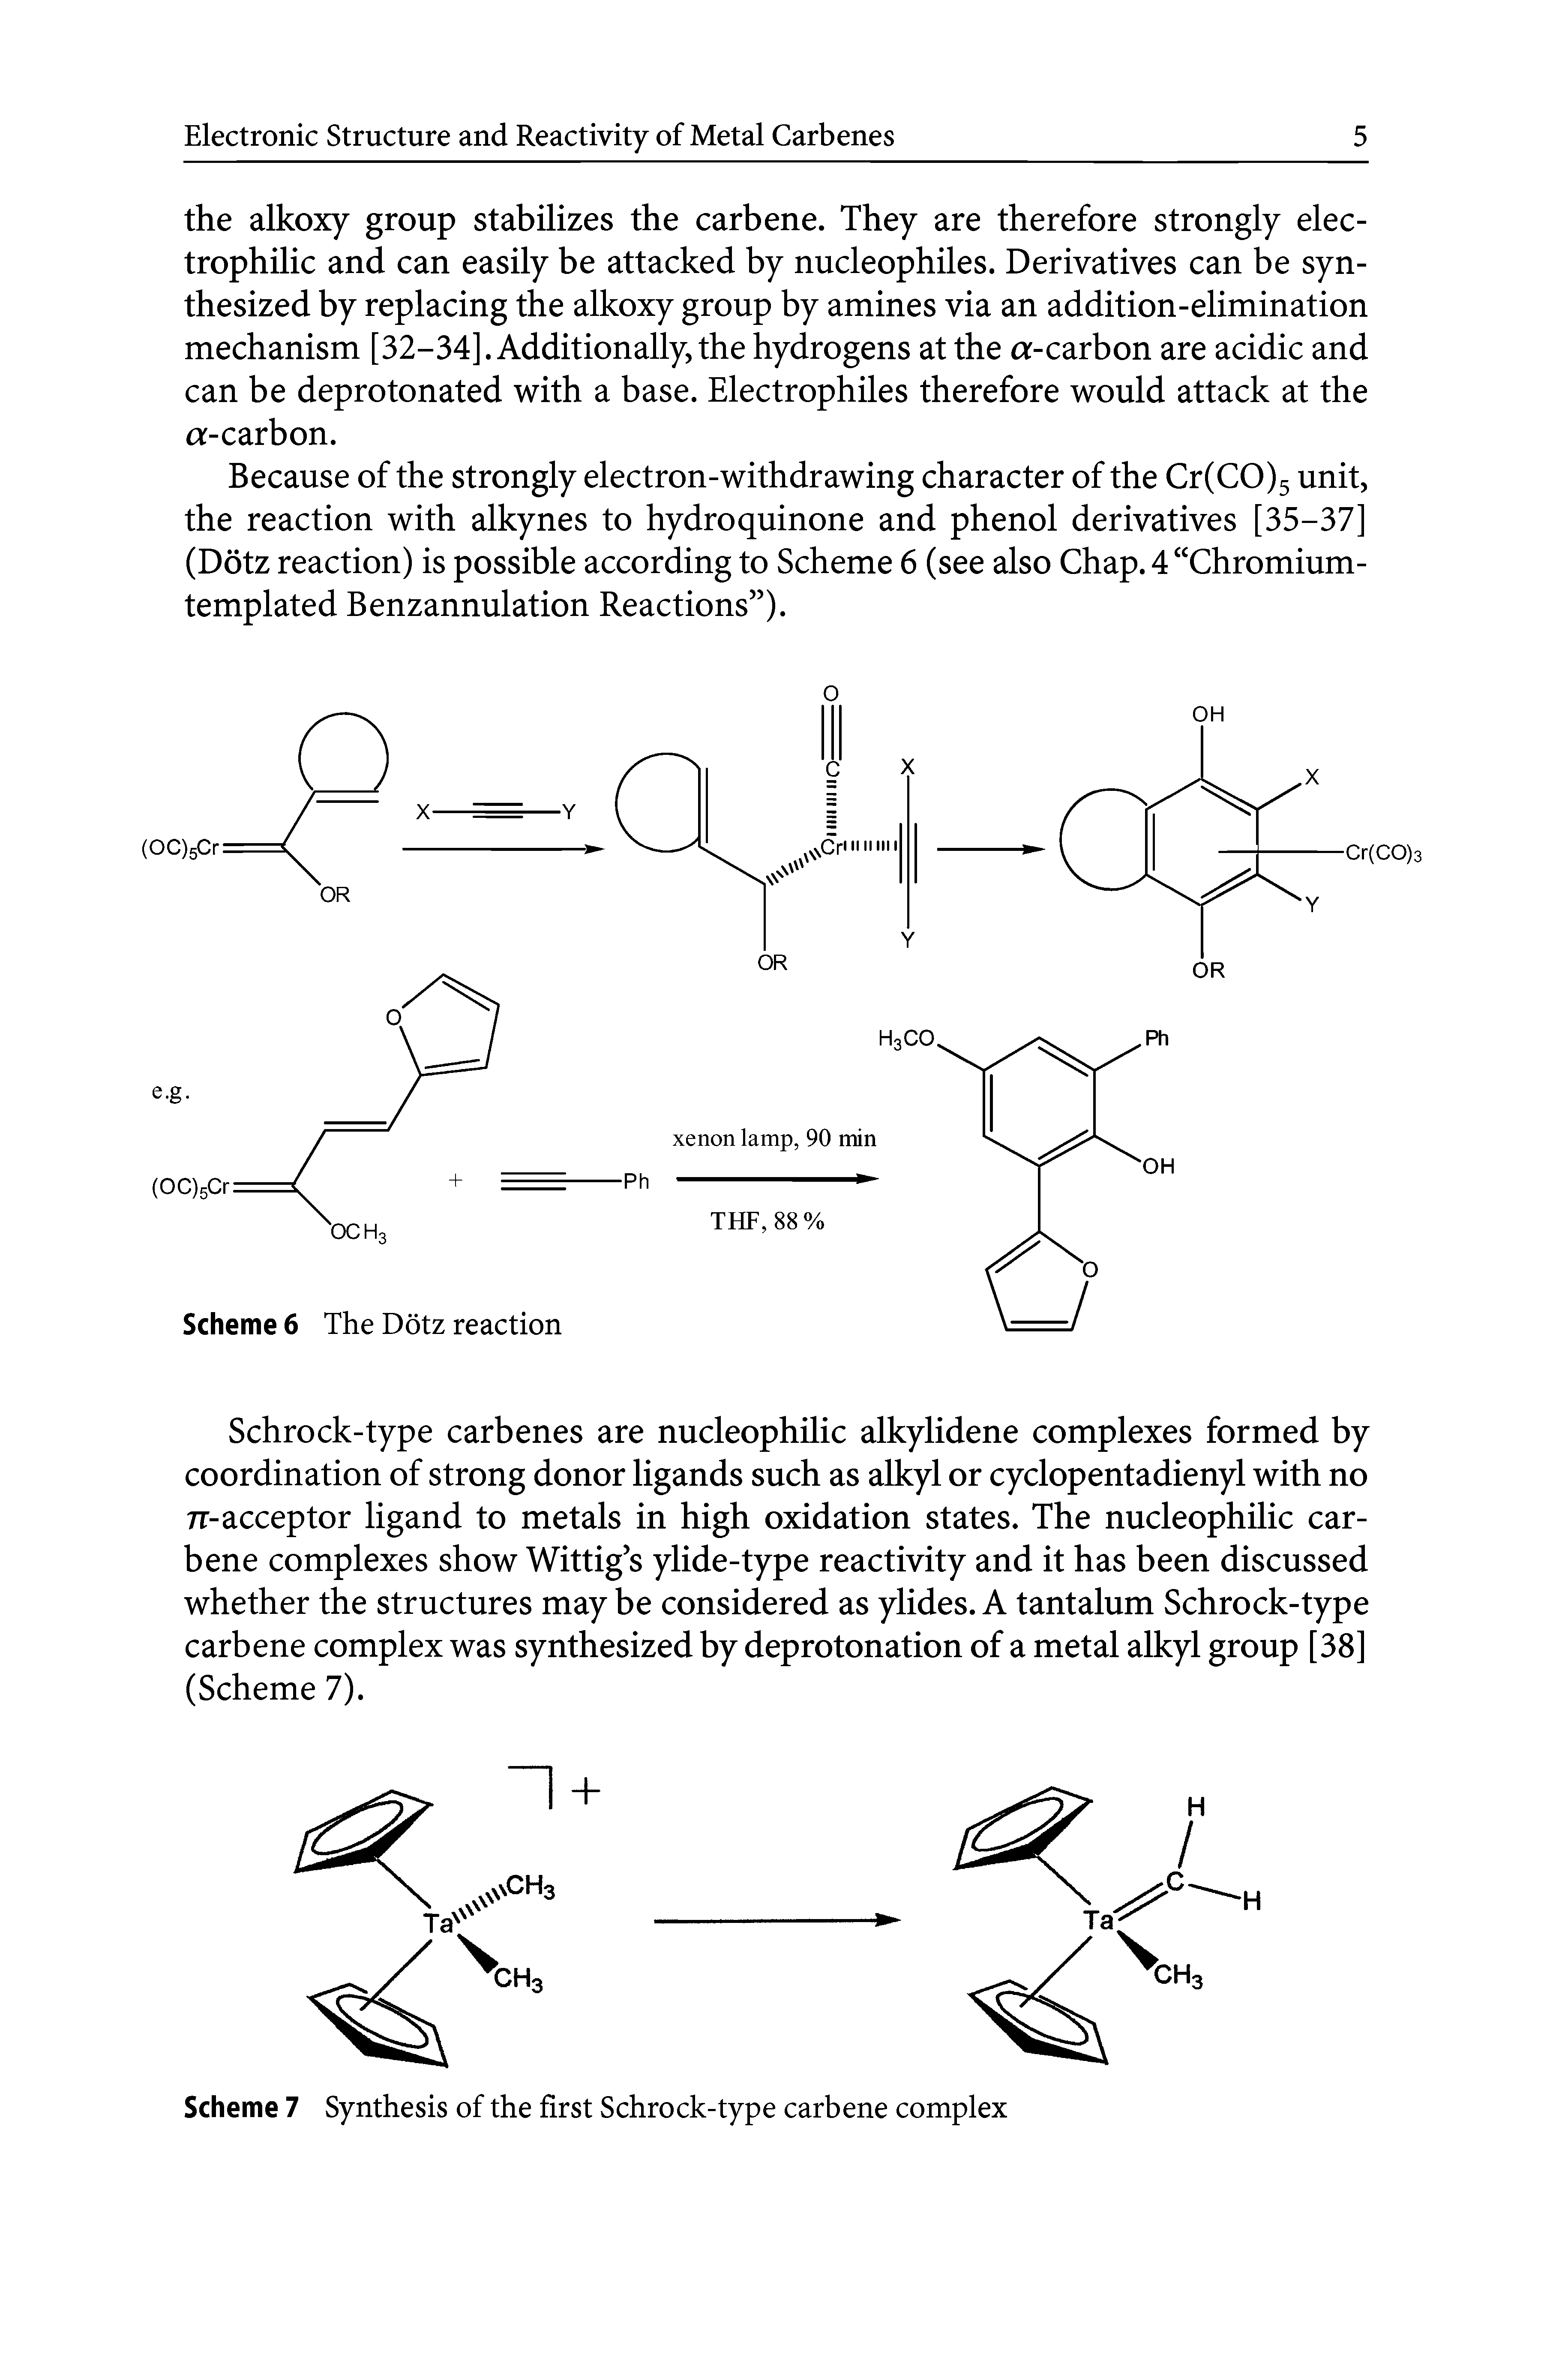 Scheme 7 Synthesis of the first Schrock-type carbene complex...